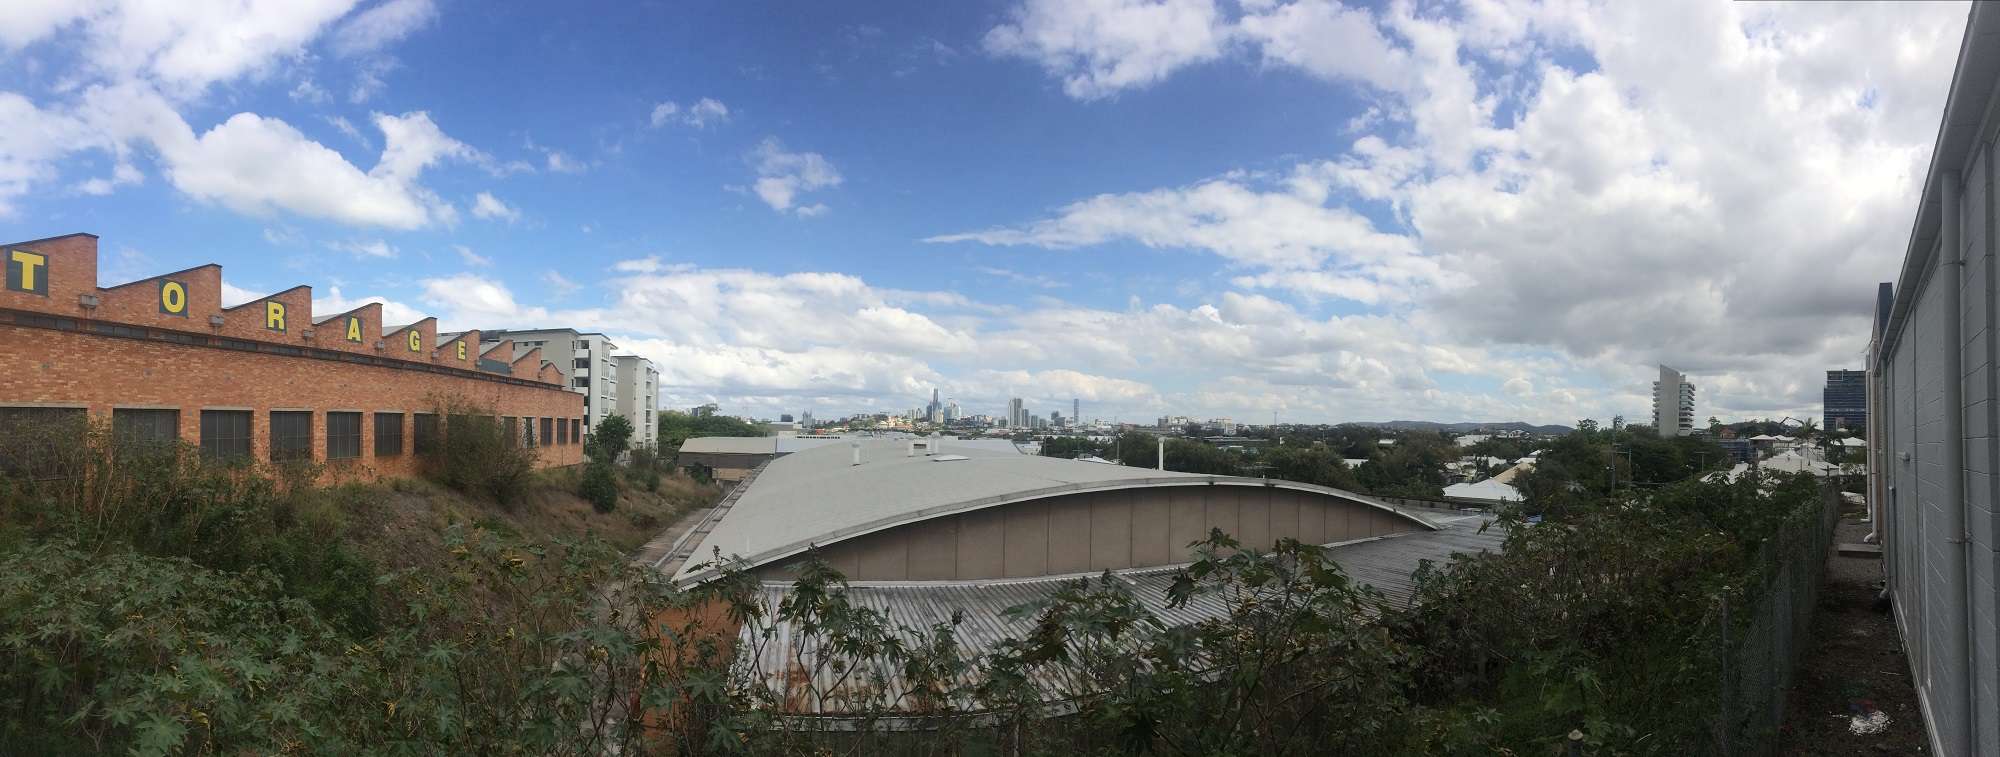 View over deco. Taken by Property Mash.